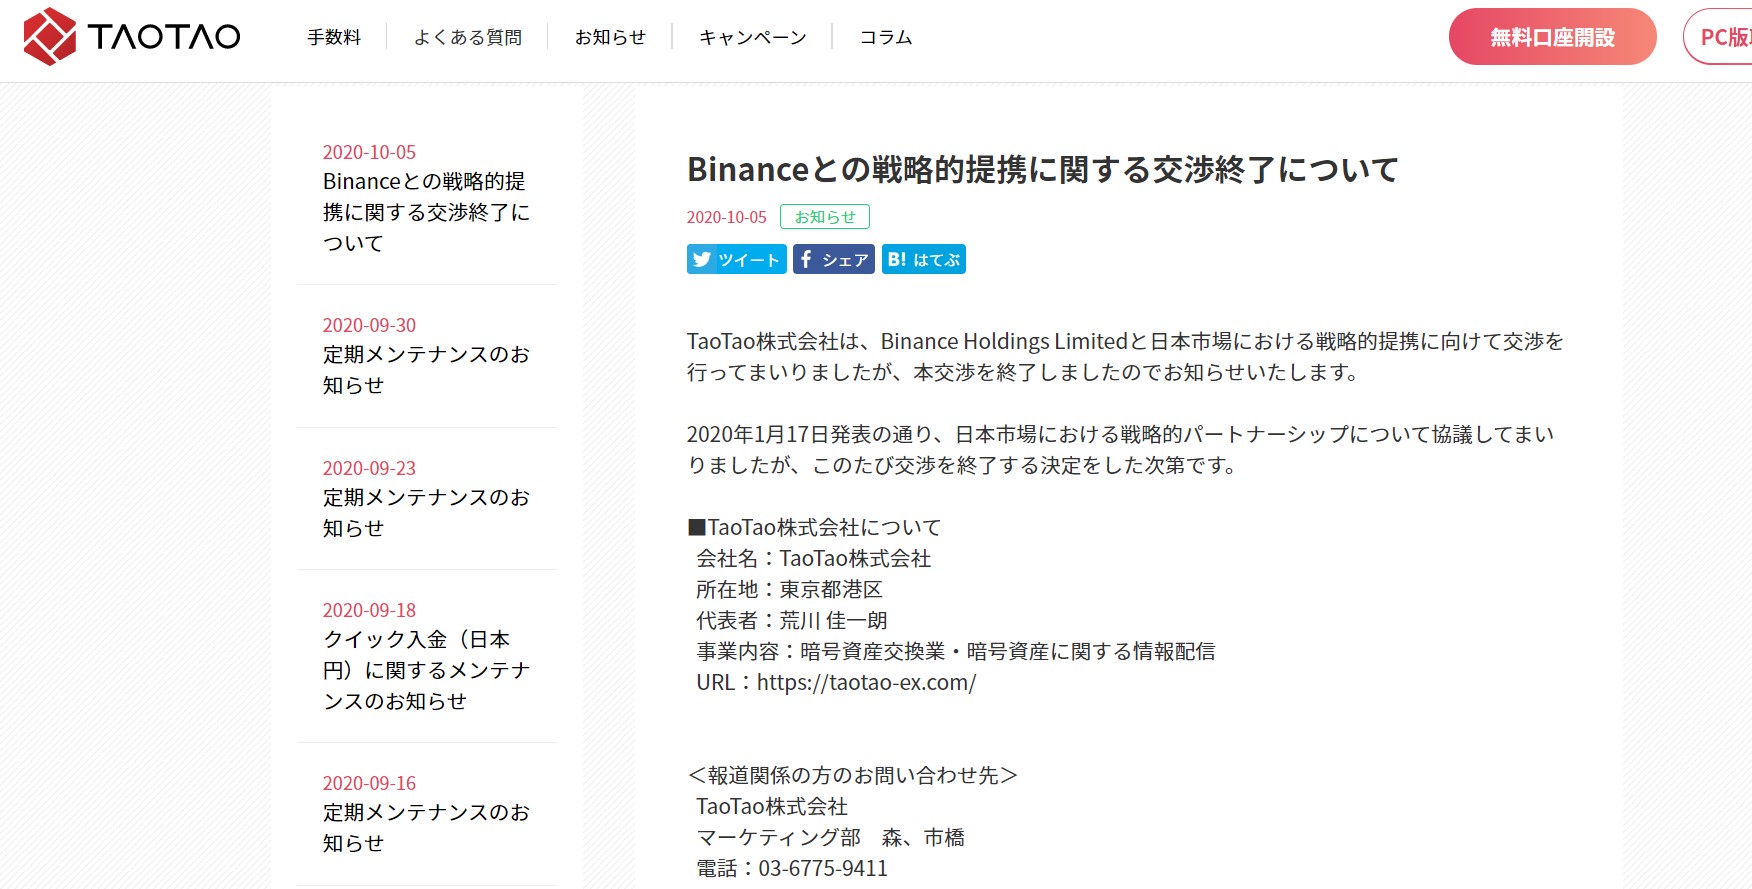 TaoTao Inc. refused to cooperate with Binance in Japan